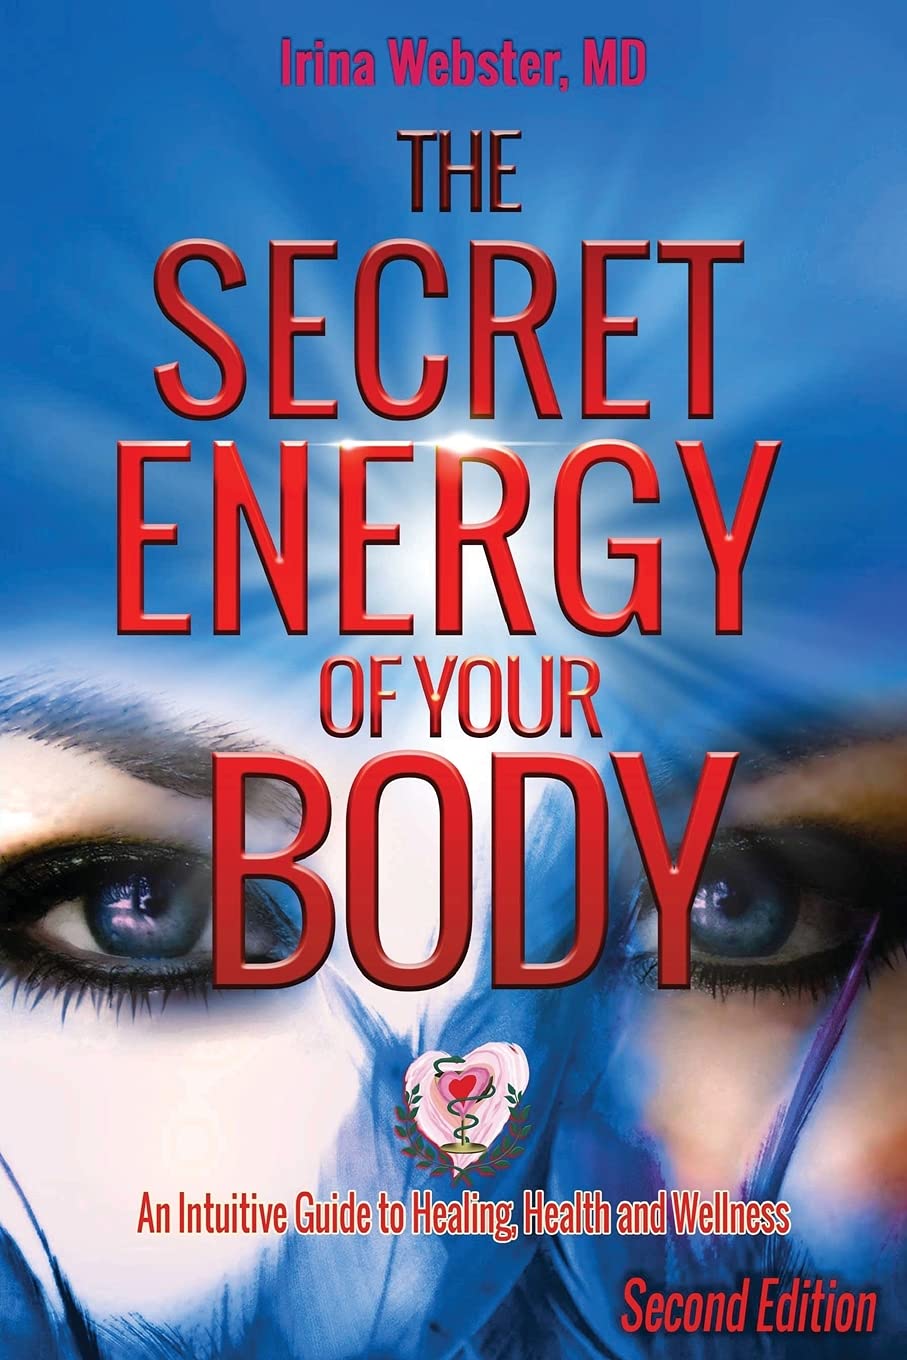 The Secret Energy of Your Body – 2nd Edition